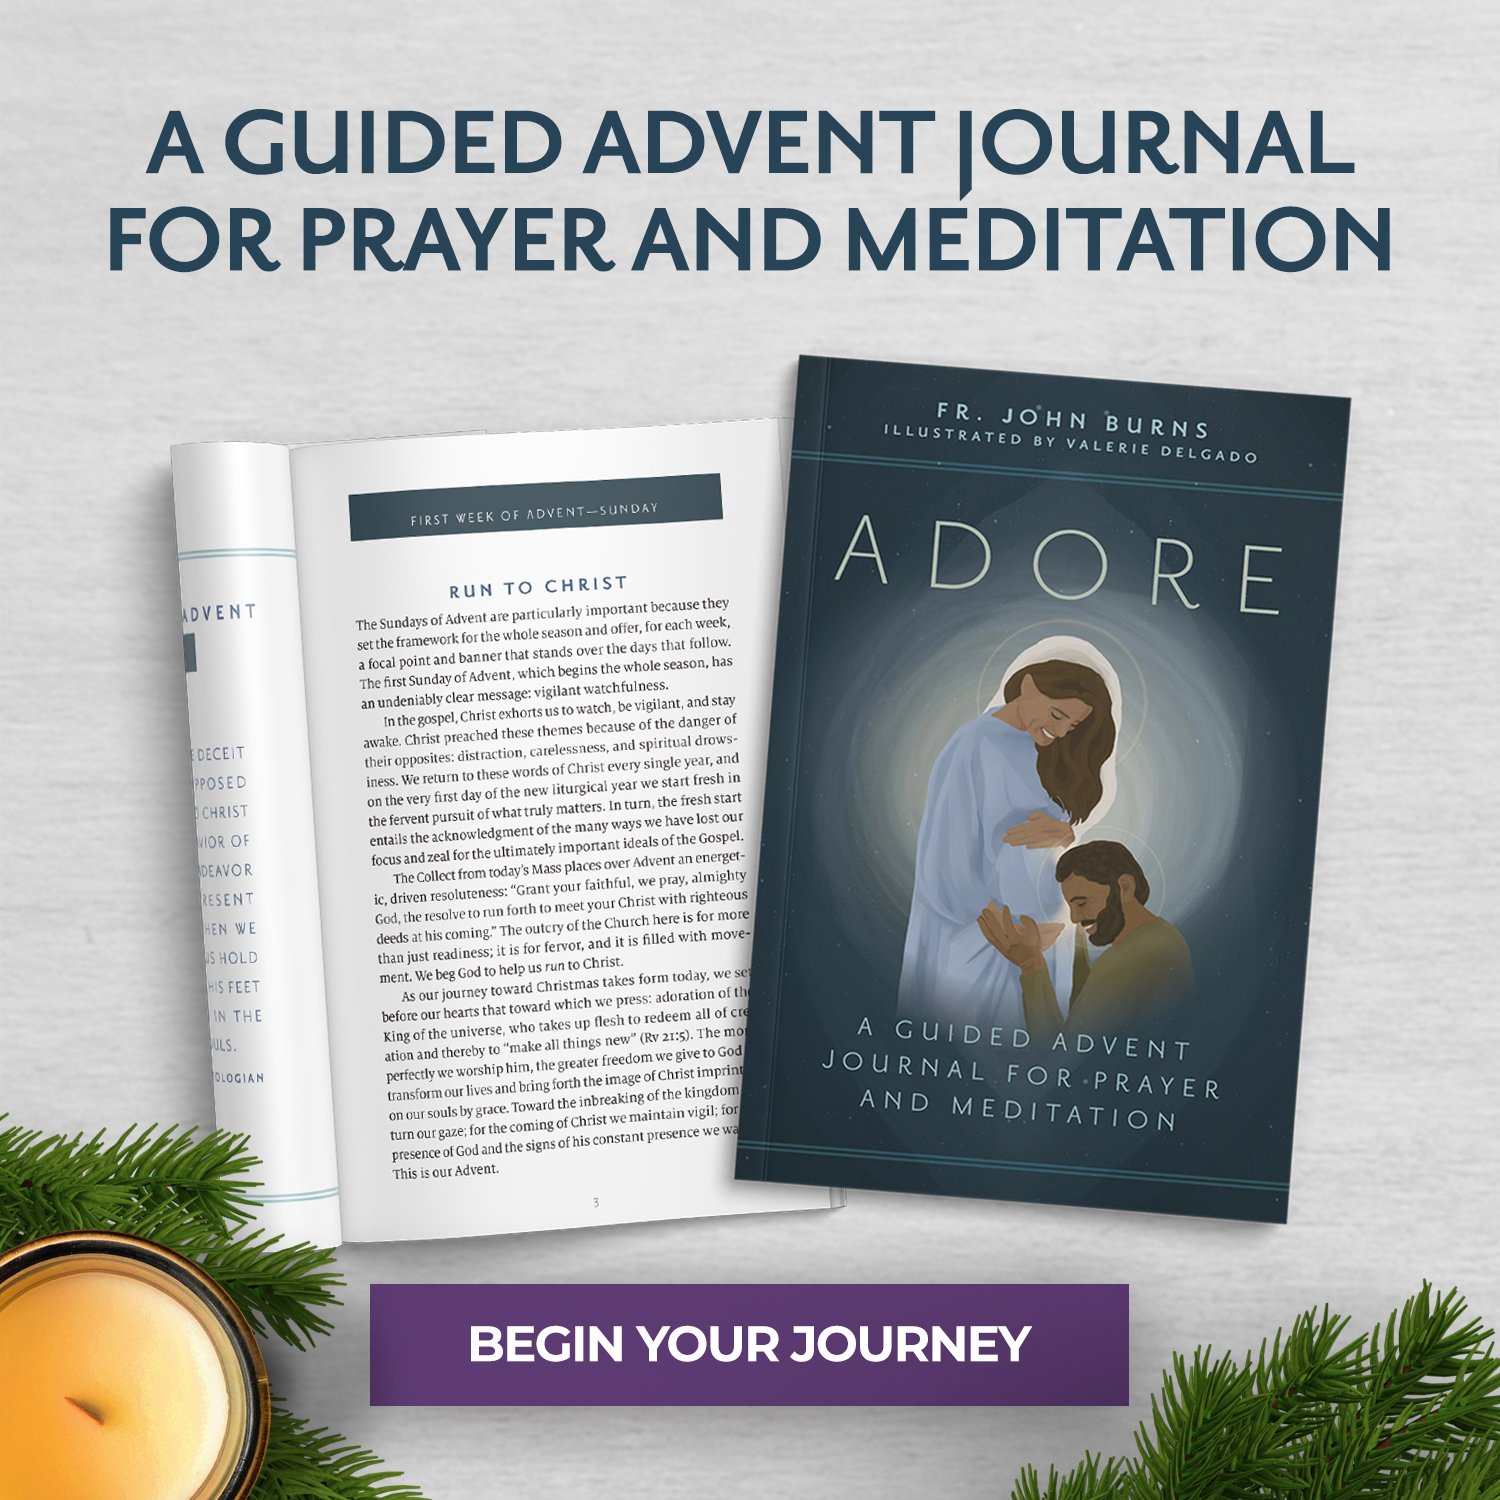 Adore guided Advent journal